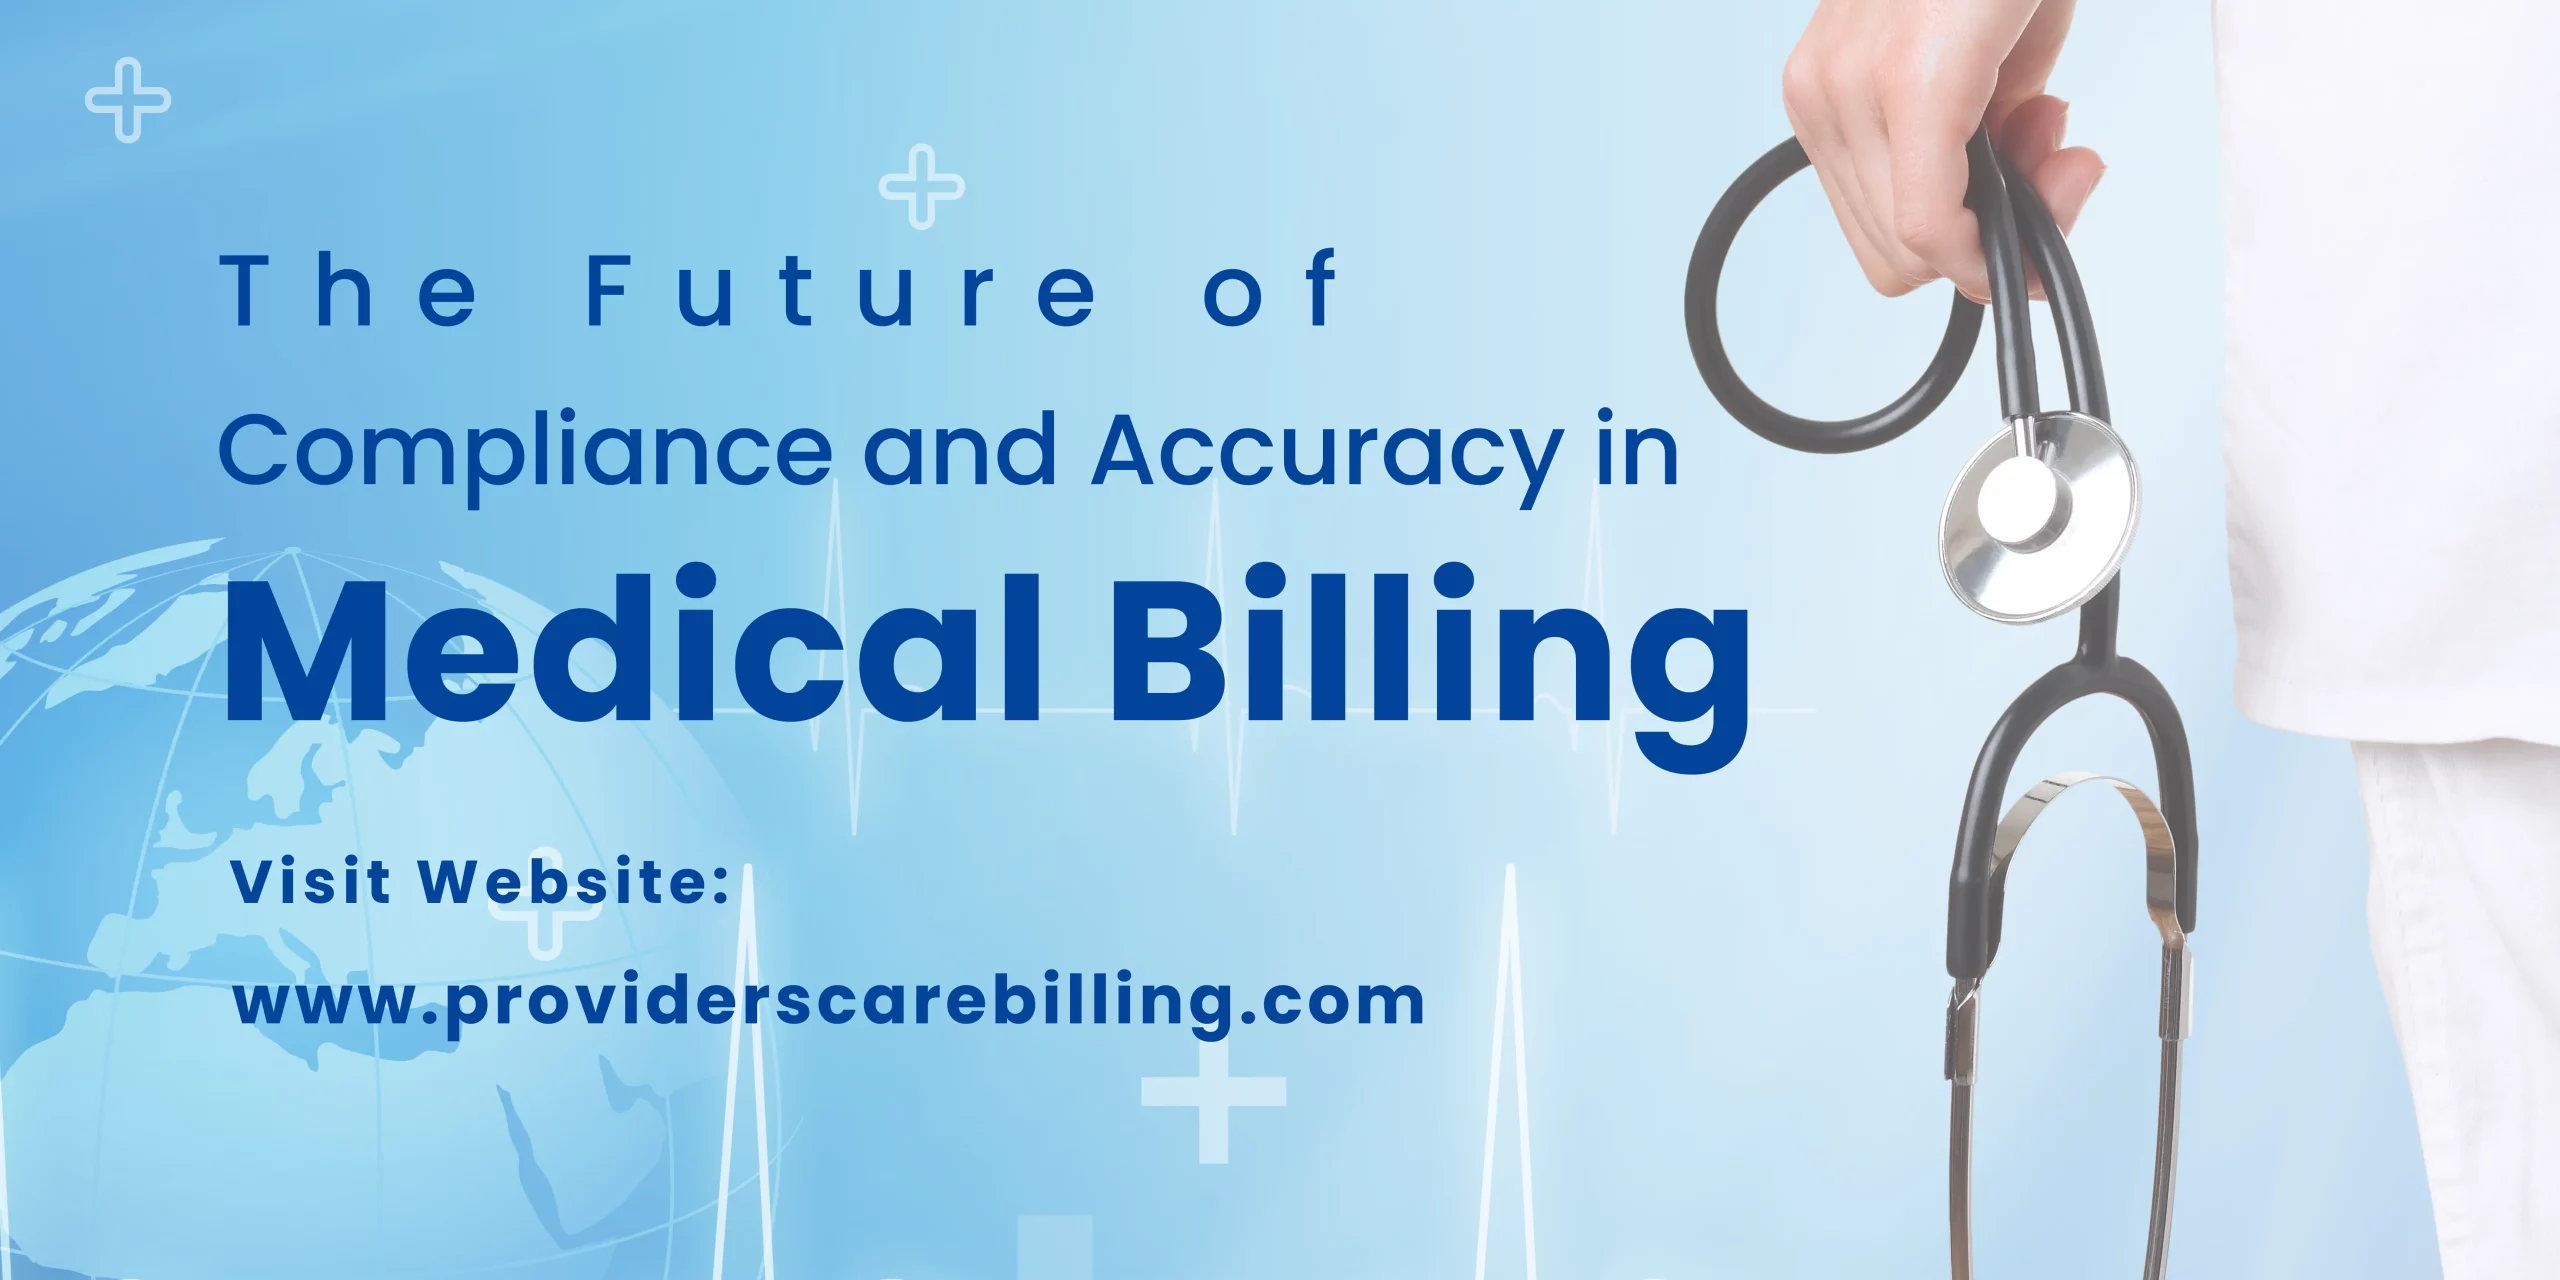 The Future of Compliance and Accuracy in Medical Billing!